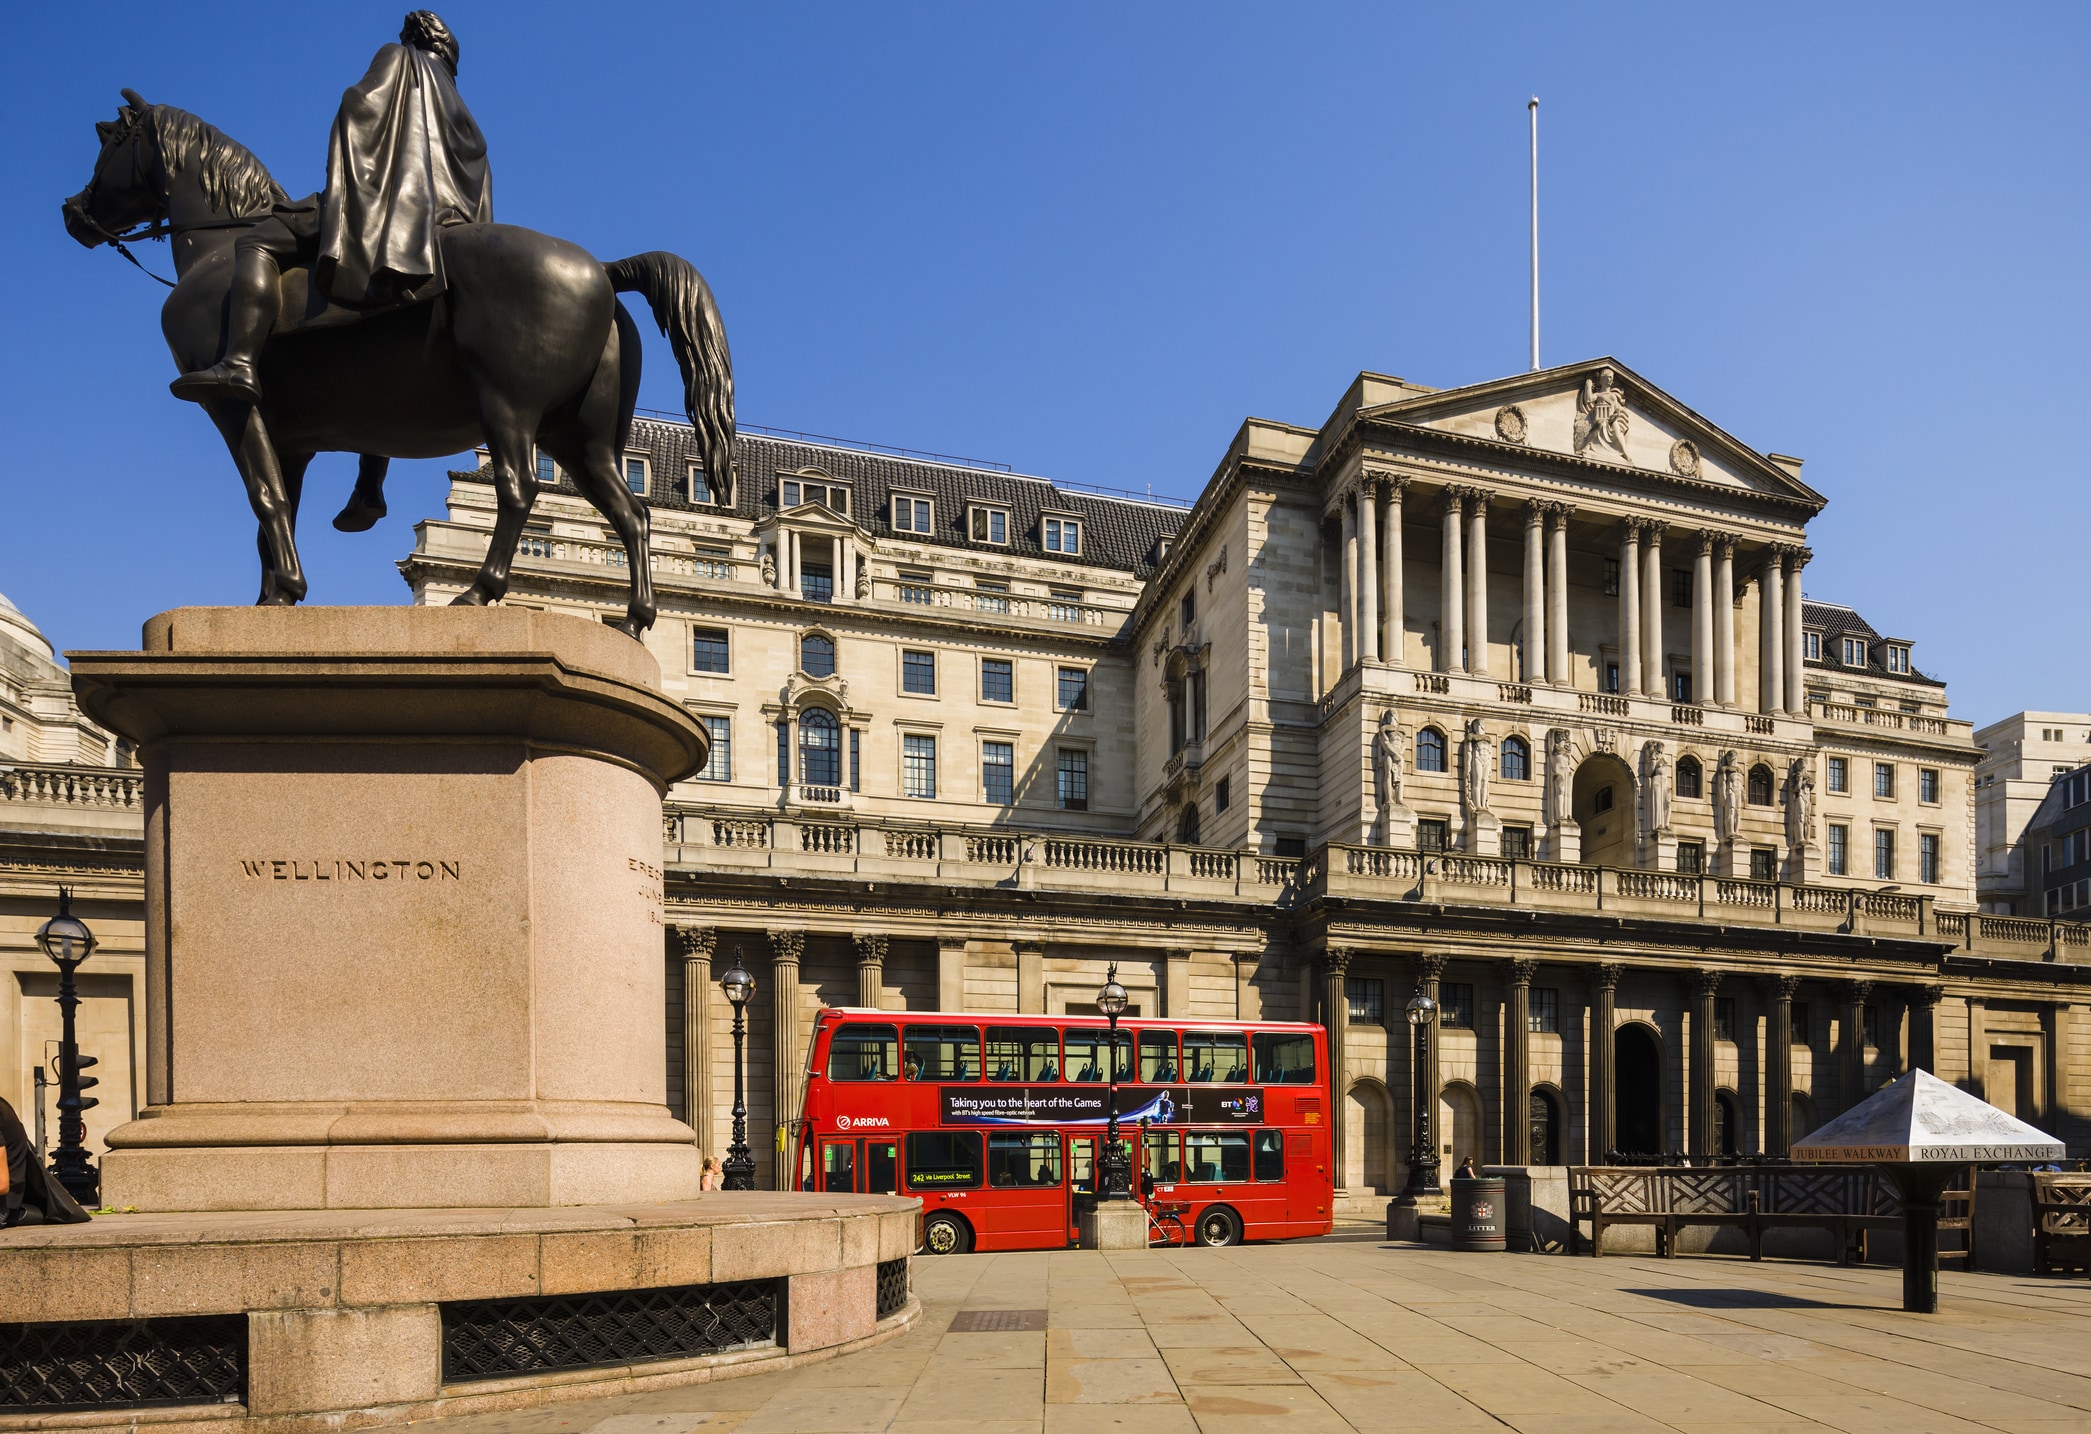 Annual review 2021: GBP - The Bank of England